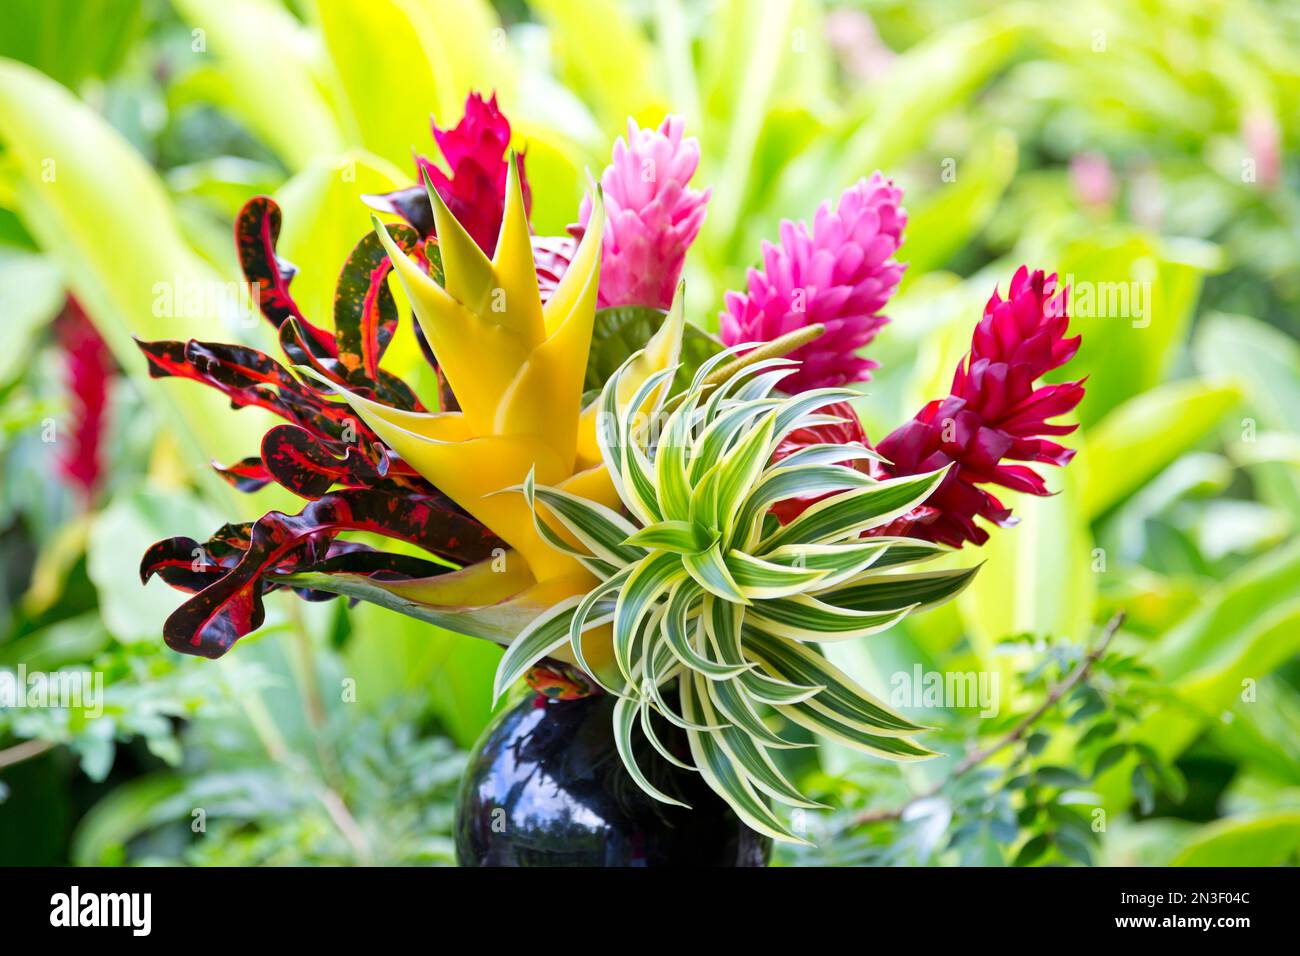 Colorful, tropical flower arrangement in vase with a forest background; Hana, Maui, Hawaii, United States of America Stock Photo